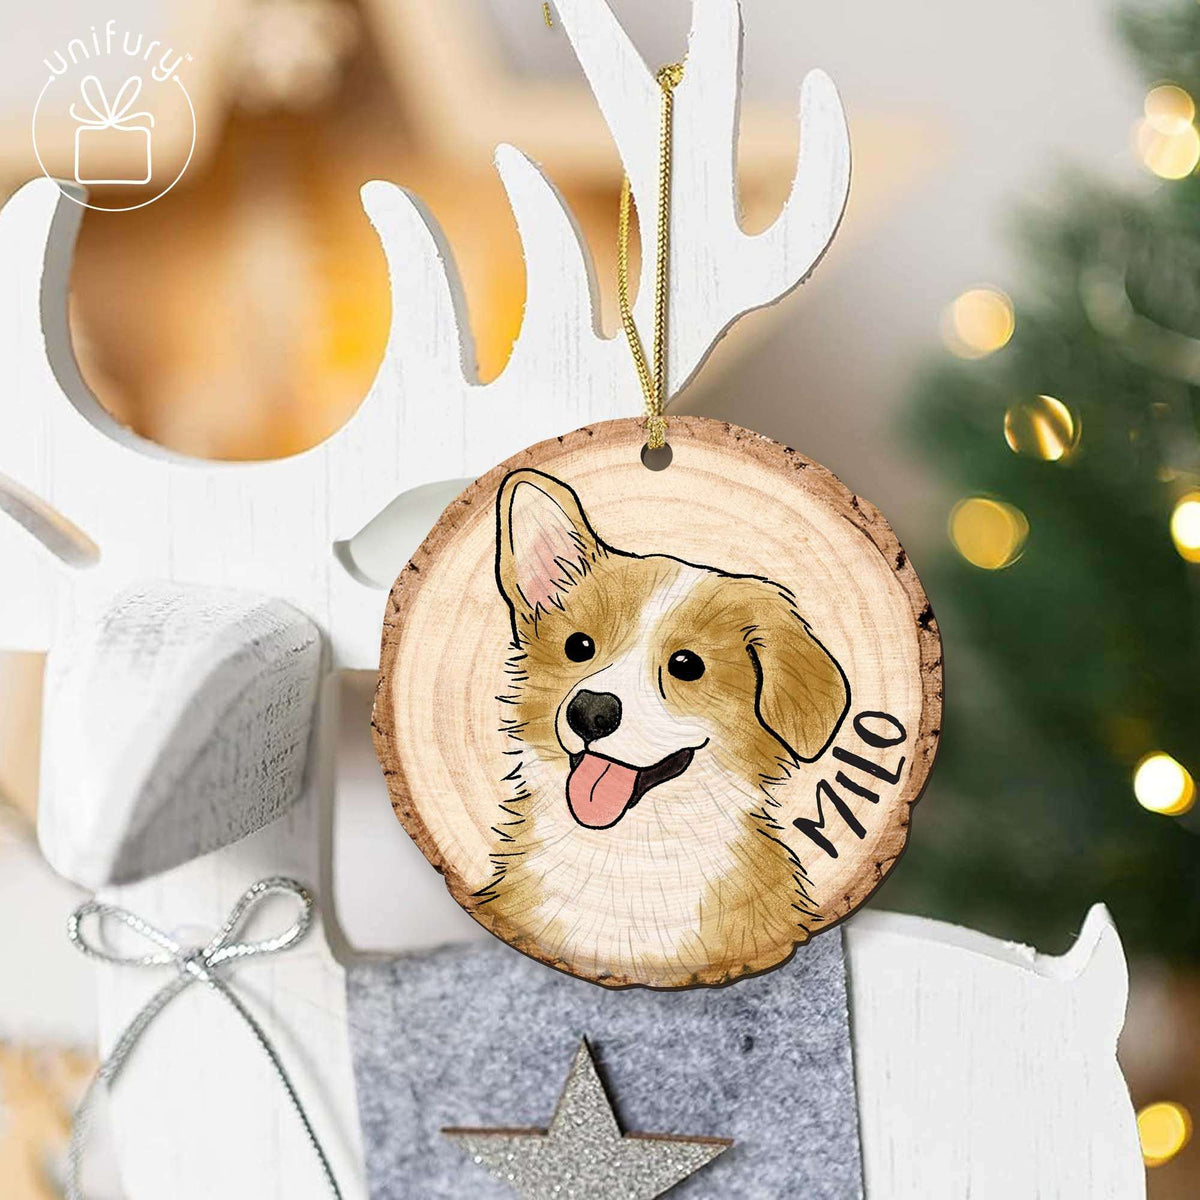 Unique Pet&#39;s Face Wooden Ornament - Hand-Draw Dog Potrait From Photo - Gifts For Dog Mom, Dad, Dog Lovers